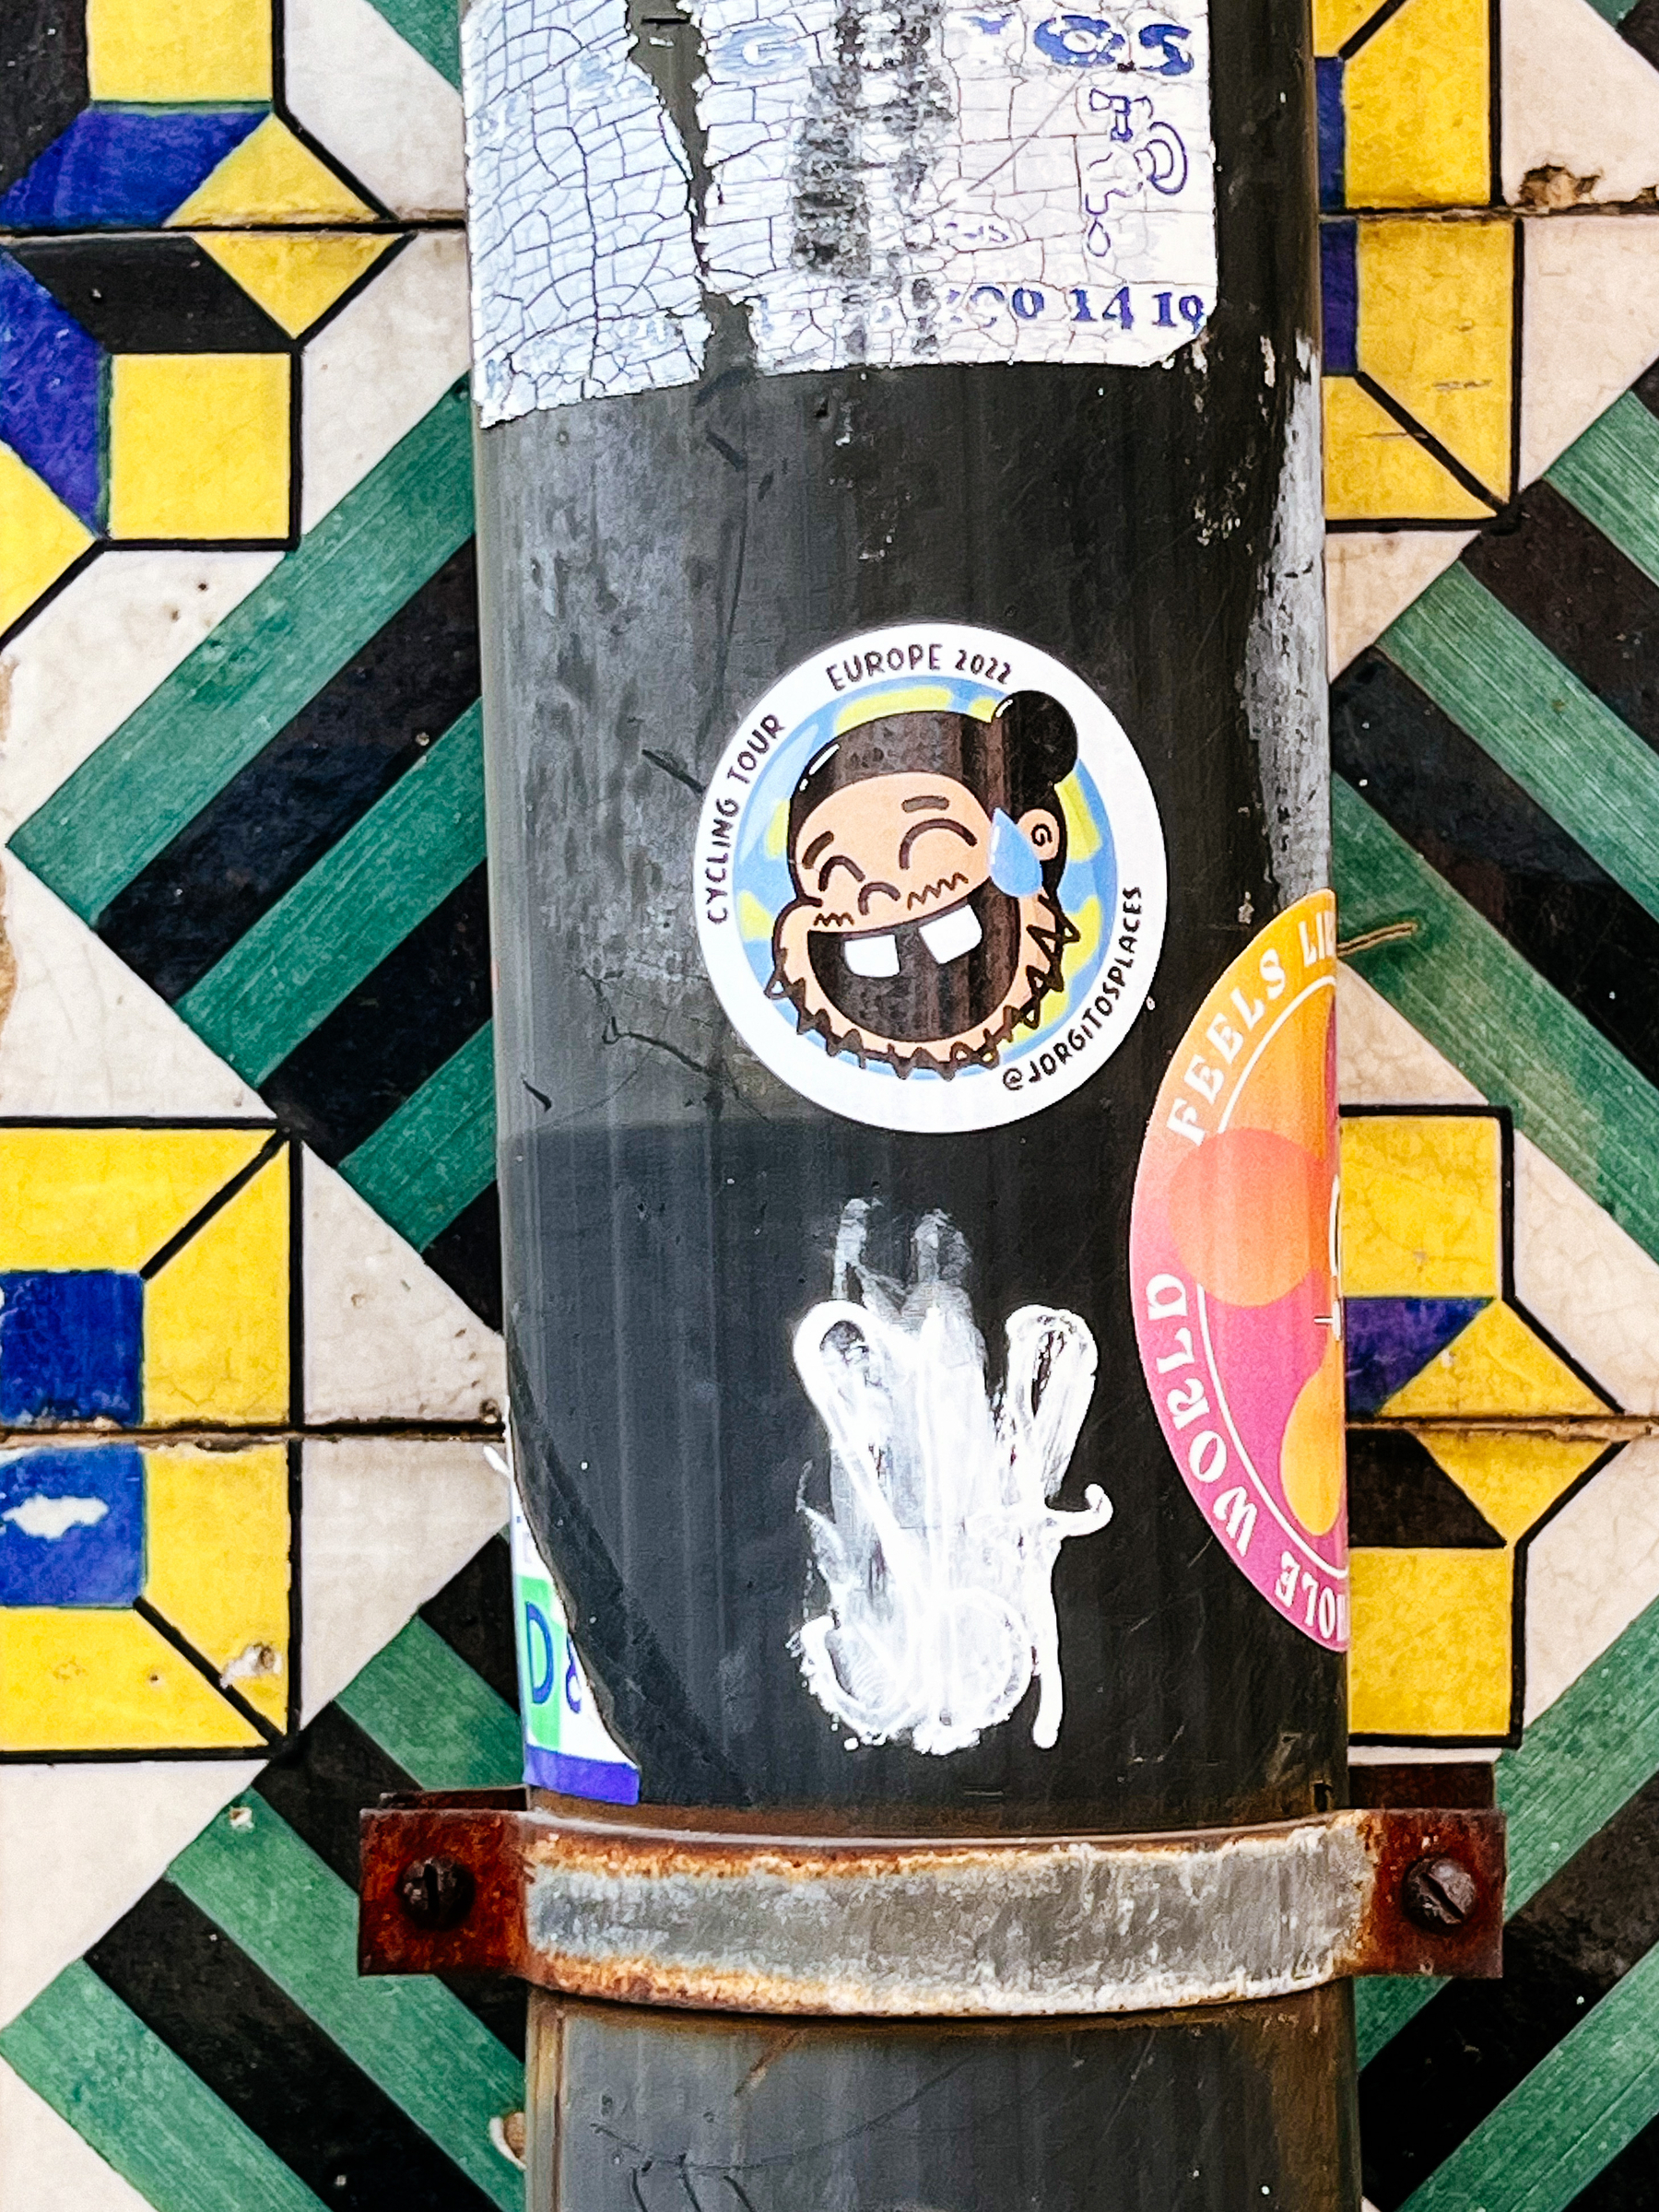 Sticker with a smiling face, cartoony. Tiled wall. 